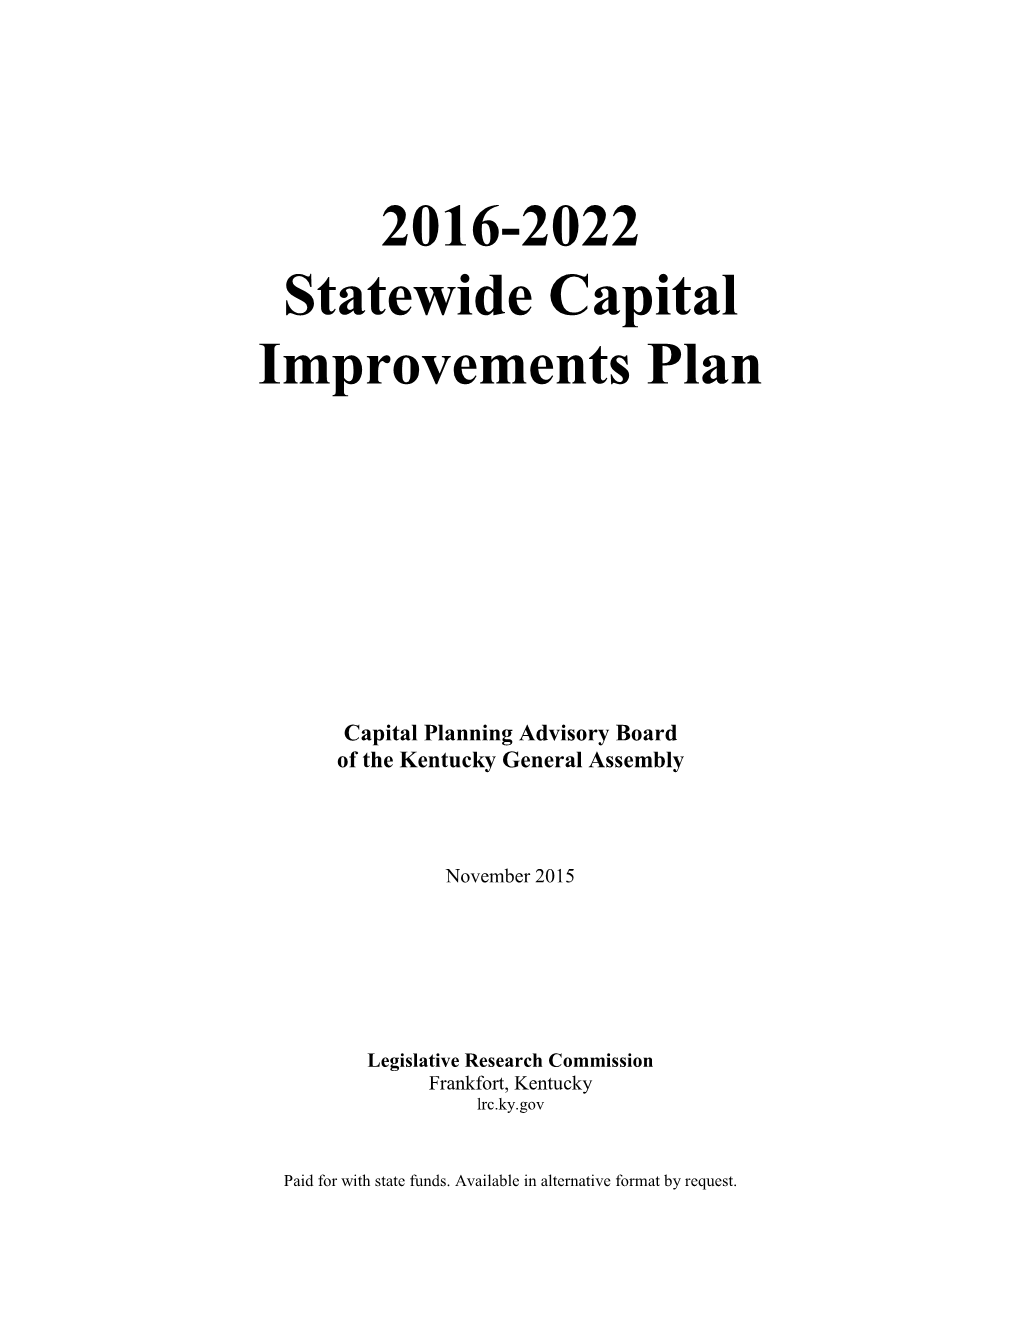 2016-2022 Statewide Capital Improvements Plan